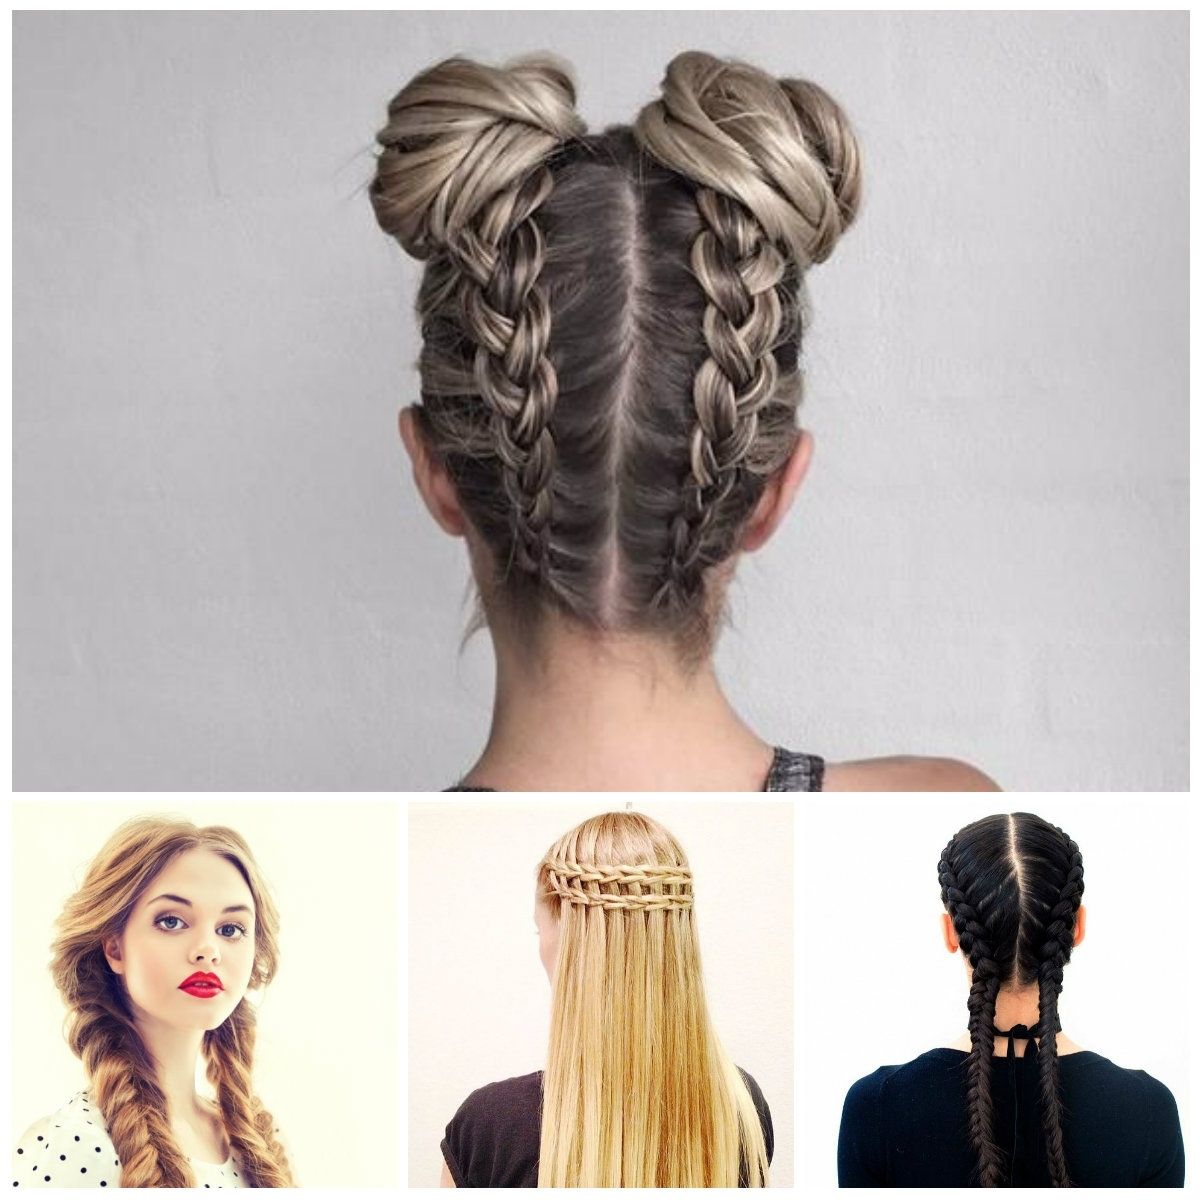 Unique Double Braided Hairstyle Ideas – New Hairstyles 2017 For Long For Current Messy Double Braid Hairstyles (View 7 of 15)